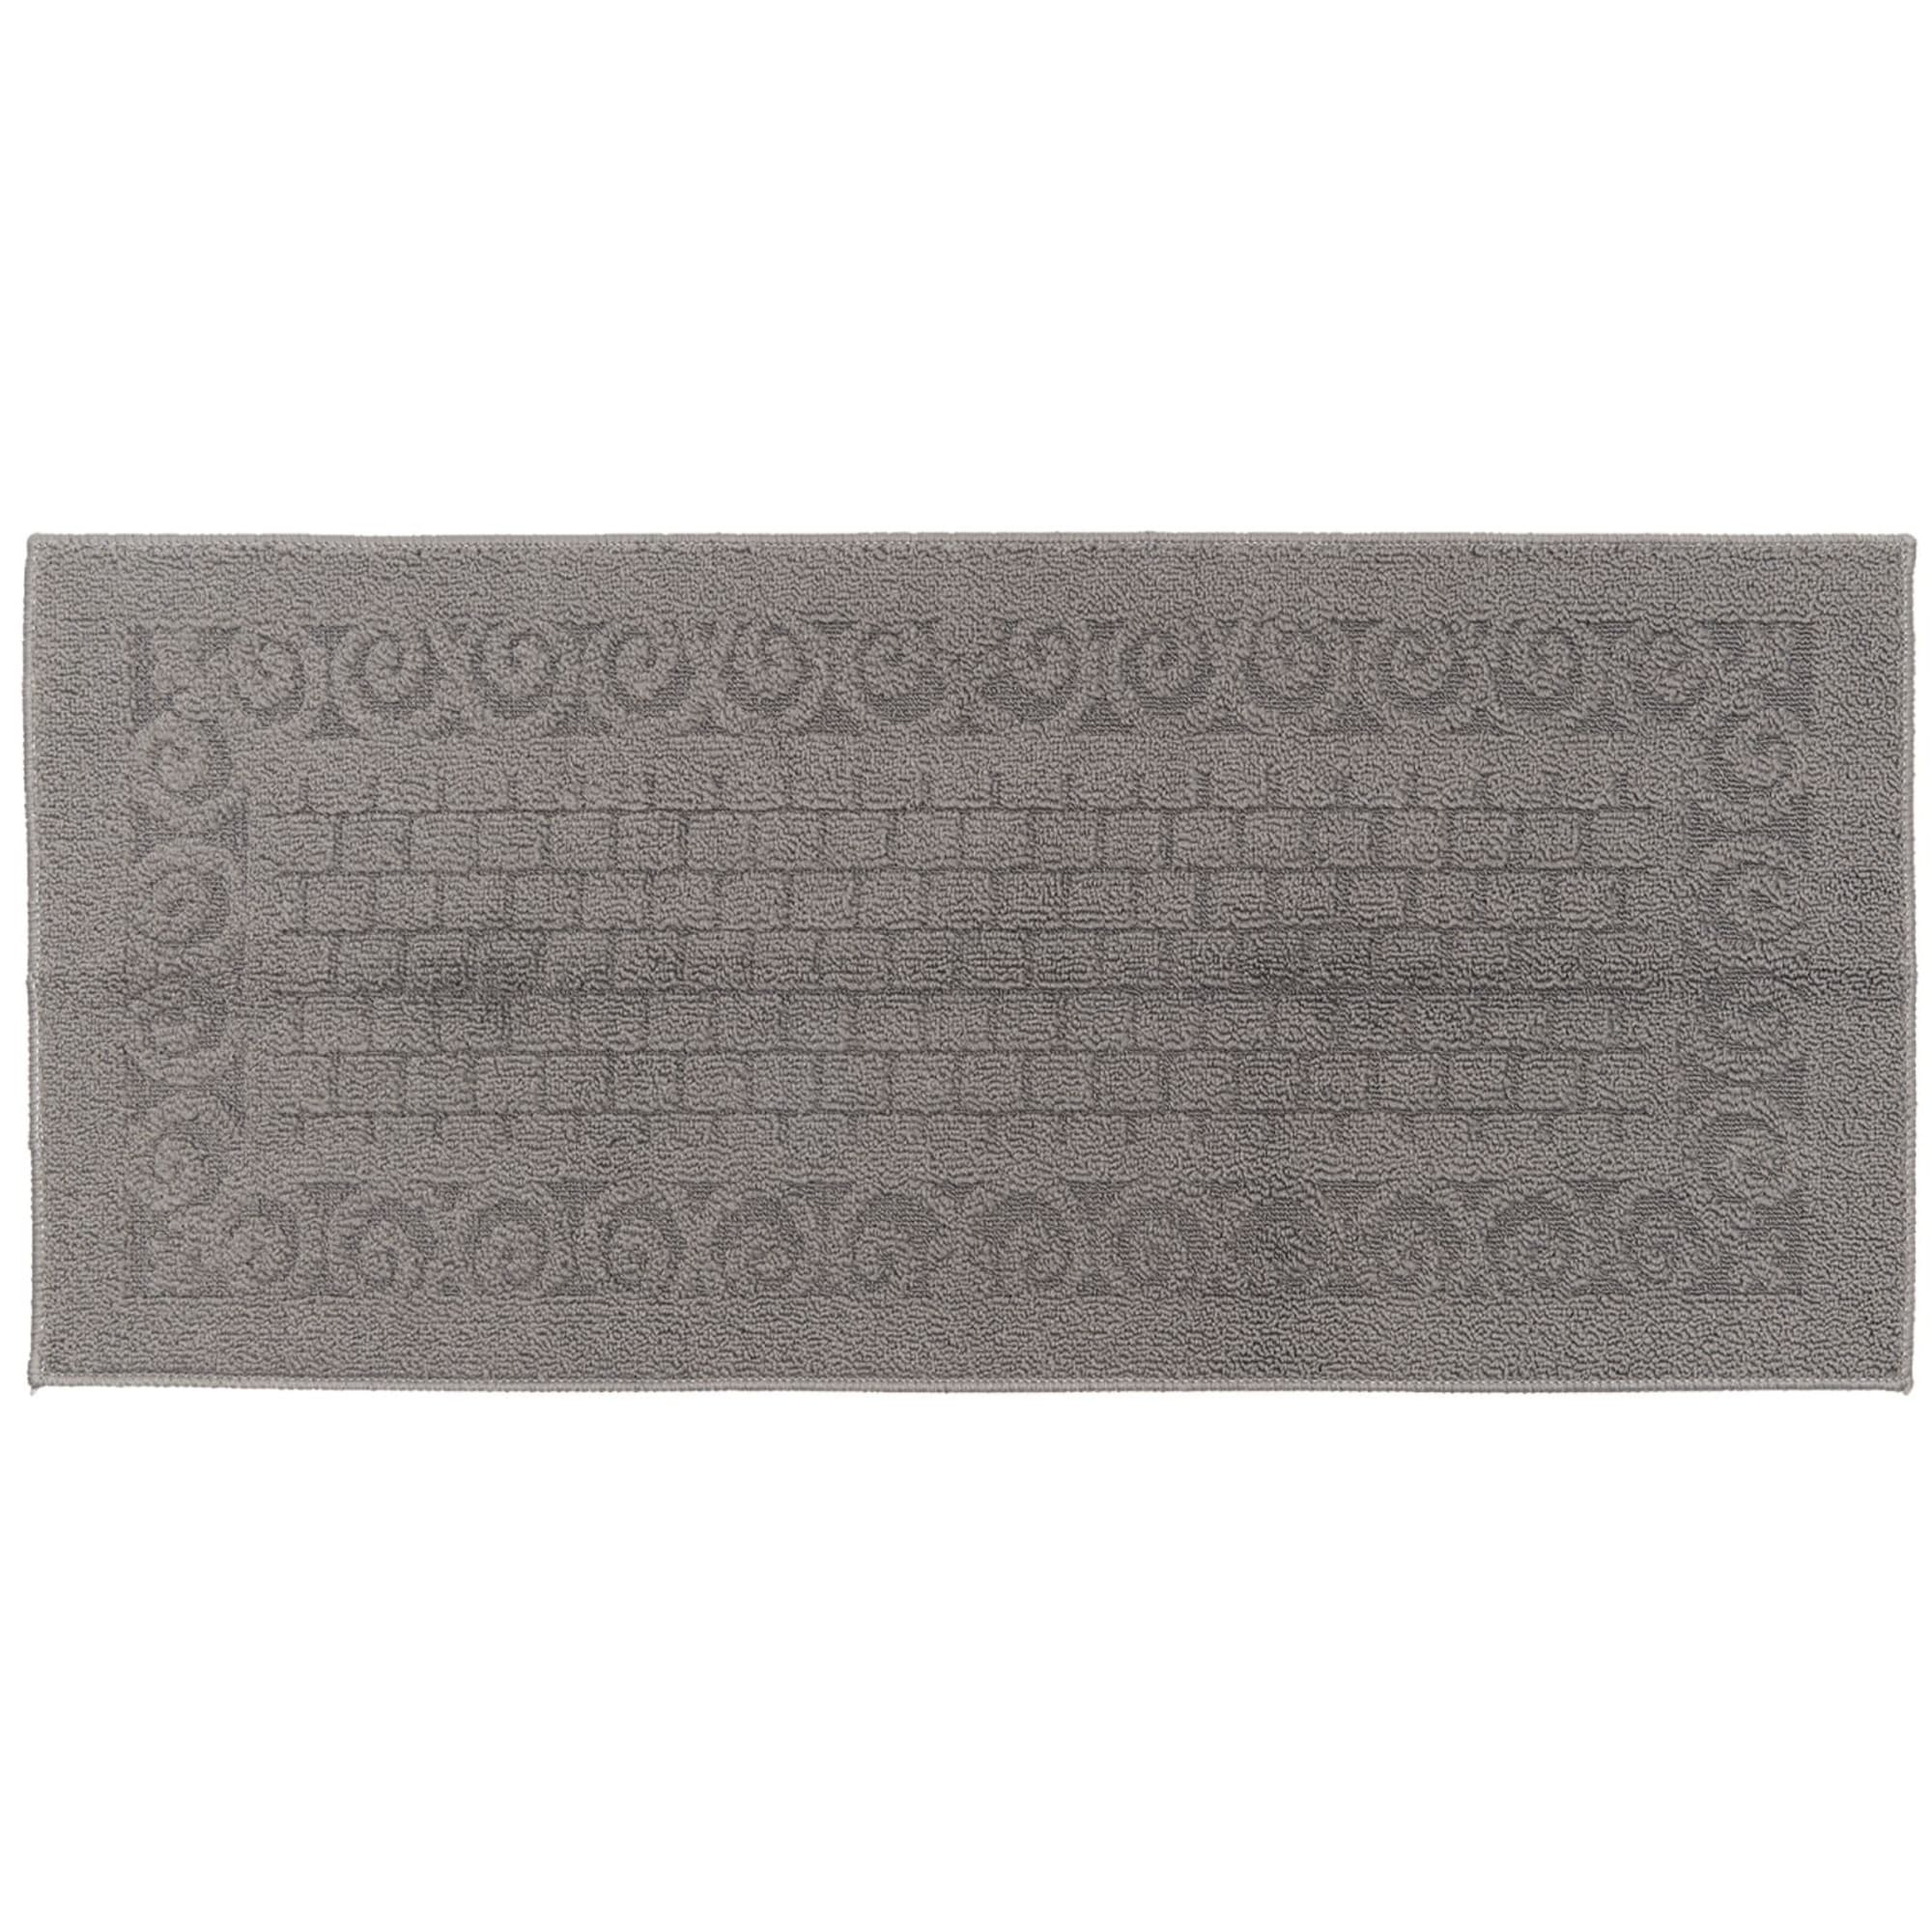 https://ak1.ostkcdn.com/images/products/is/images/direct/5b28d61c4b592d95ab8d4f326eb7083860ef1fc9/Grey-Rubber-Backed-Rug%2C-Washable-Long-Kitchen-Mat%C2%A0for-Home-Entryway%C2%A0%2843-x-20-In%29.jpg